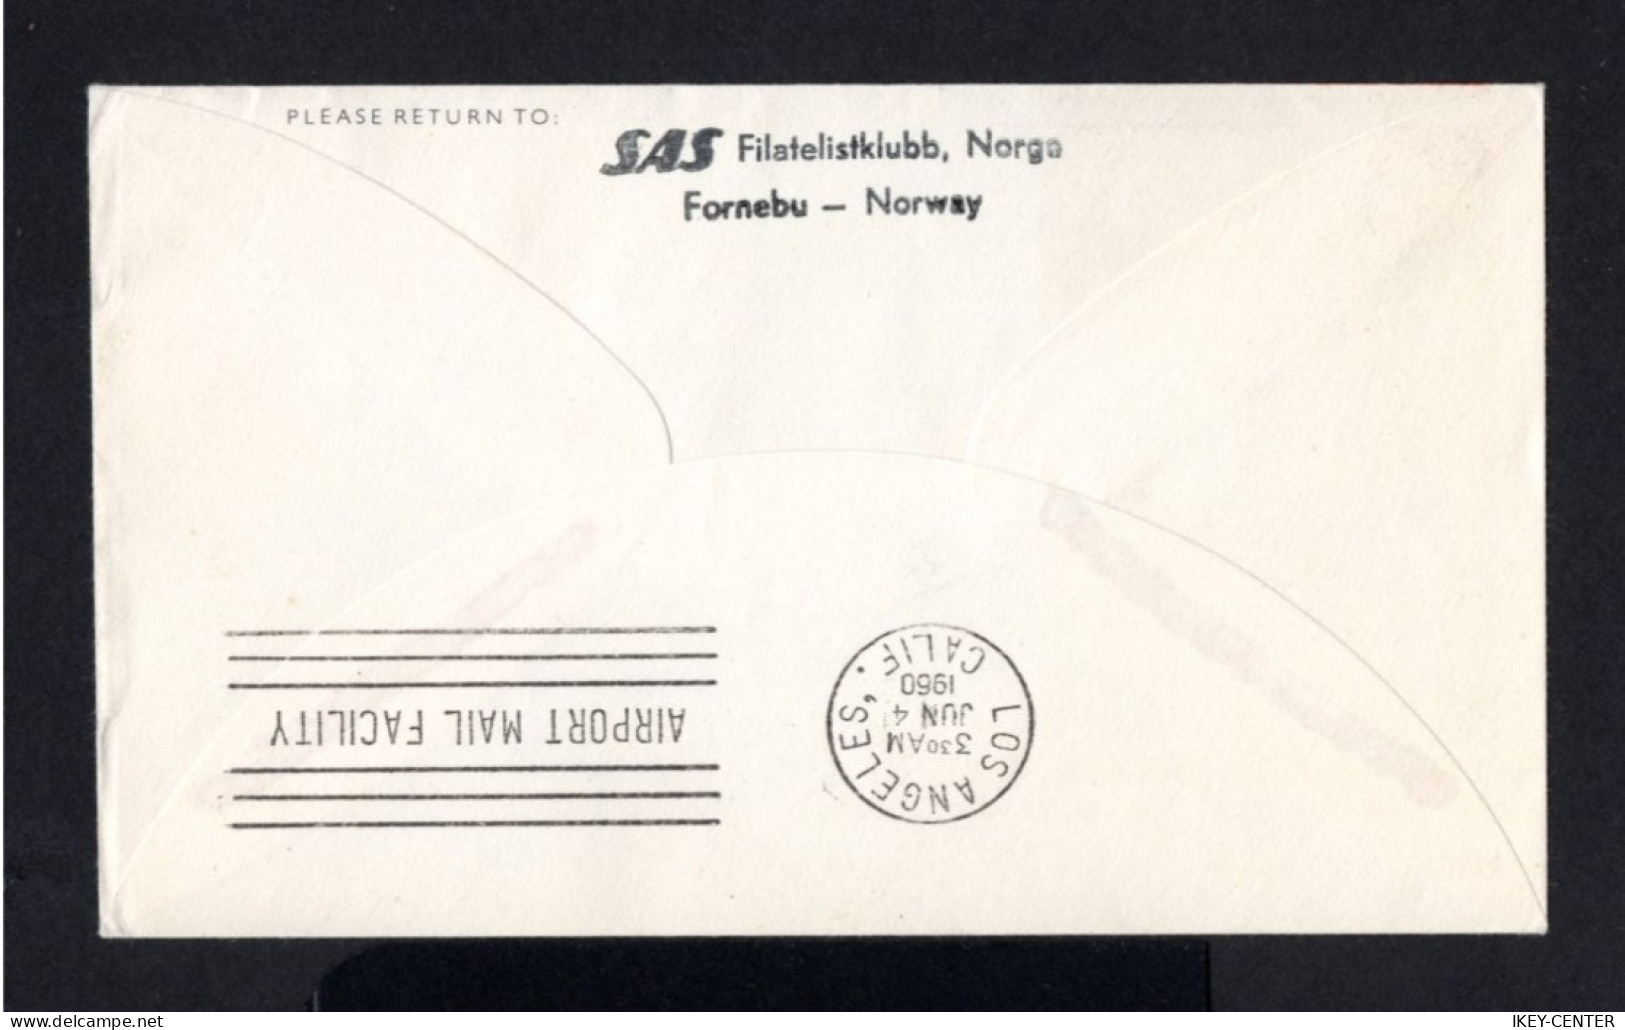 S4608-NORWAY-AIRMAIL COVER OSLO To LOS ANGELES (usa).1960.NORGE.First Jet Flight - Briefe U. Dokumente